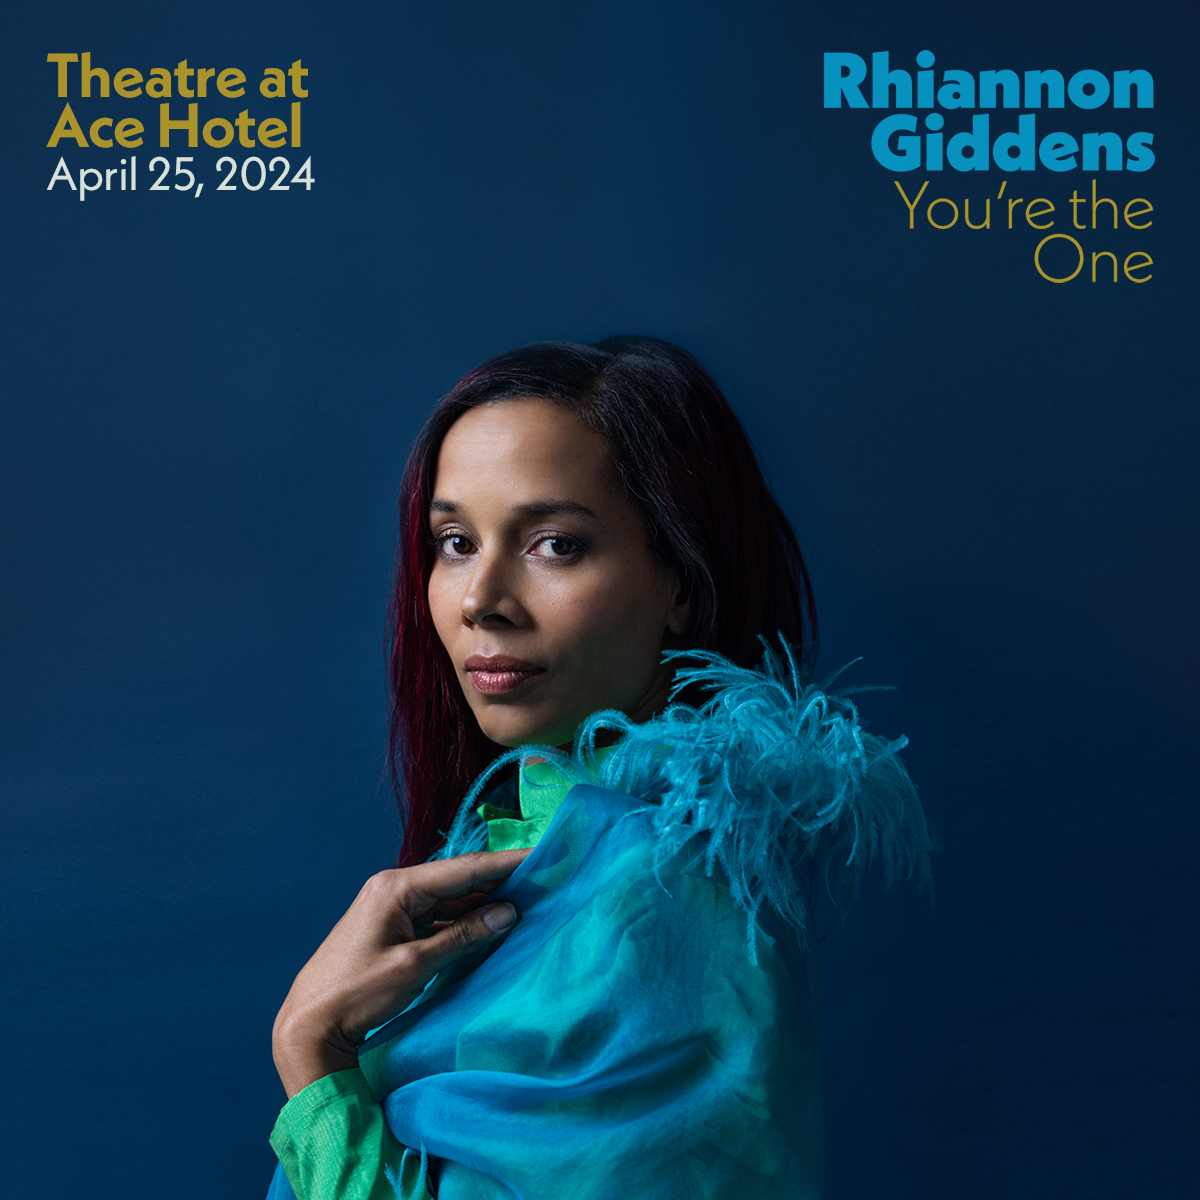 Top Description: Rhiannon Giddens You're the One Theatre at Ace Hotel April 25, 2024 Bottom: Rhiannon GIddens is pictured with a teal wrap with a feather neck, wearing a green long sleeve underneath. She faces to the left and has a magenta glow to her hair.